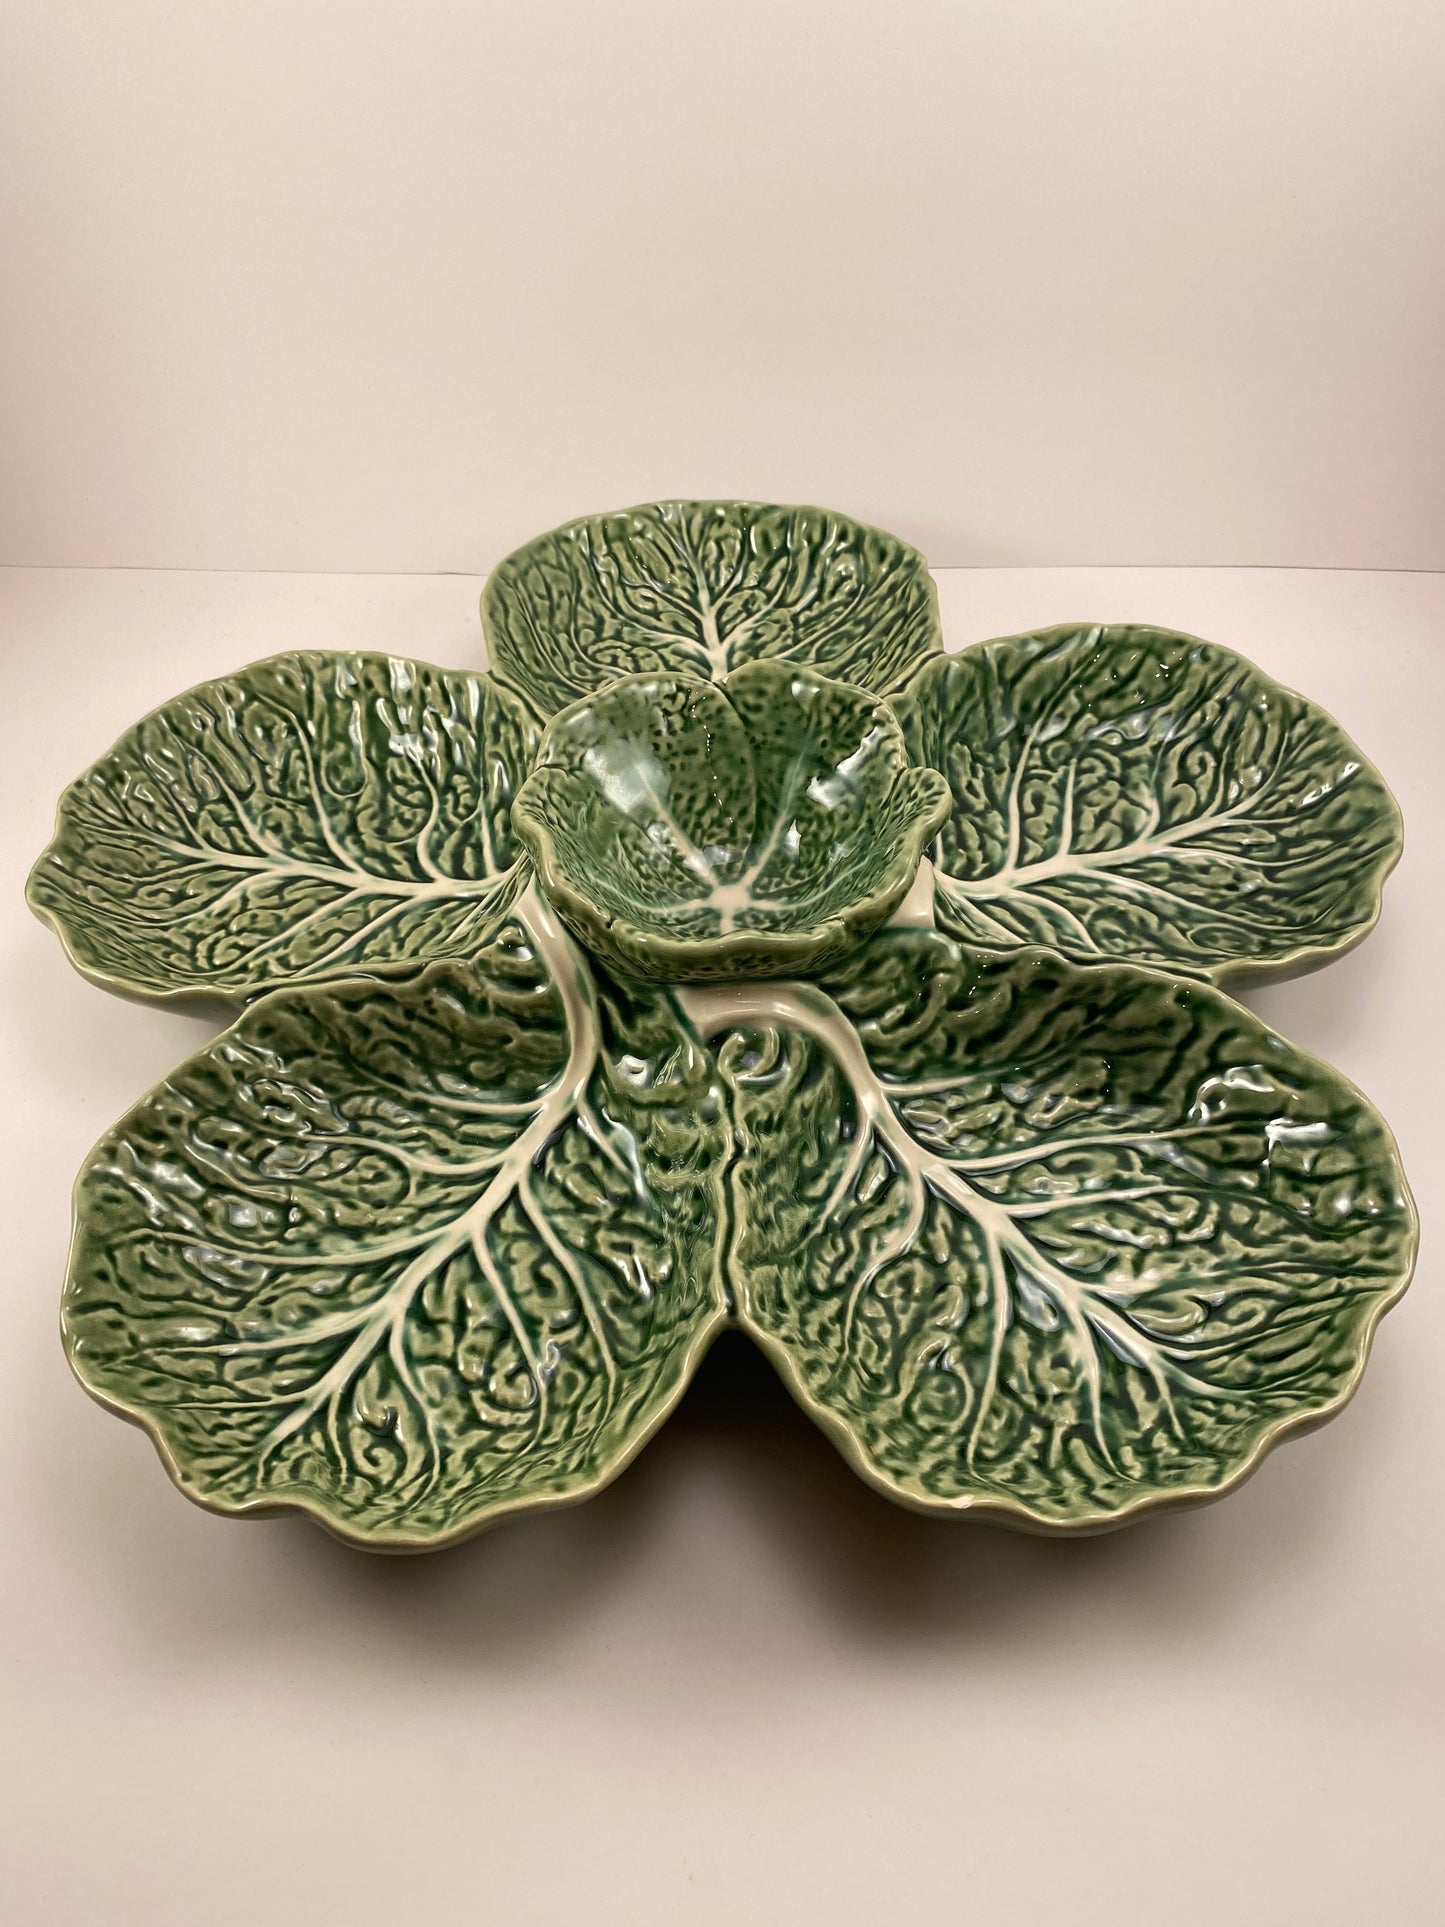 Bordallo Pinheiro Cabbage Green 6-Part Relish Dish, Divided Serving Dish and Centerpiece, made in Portugal.